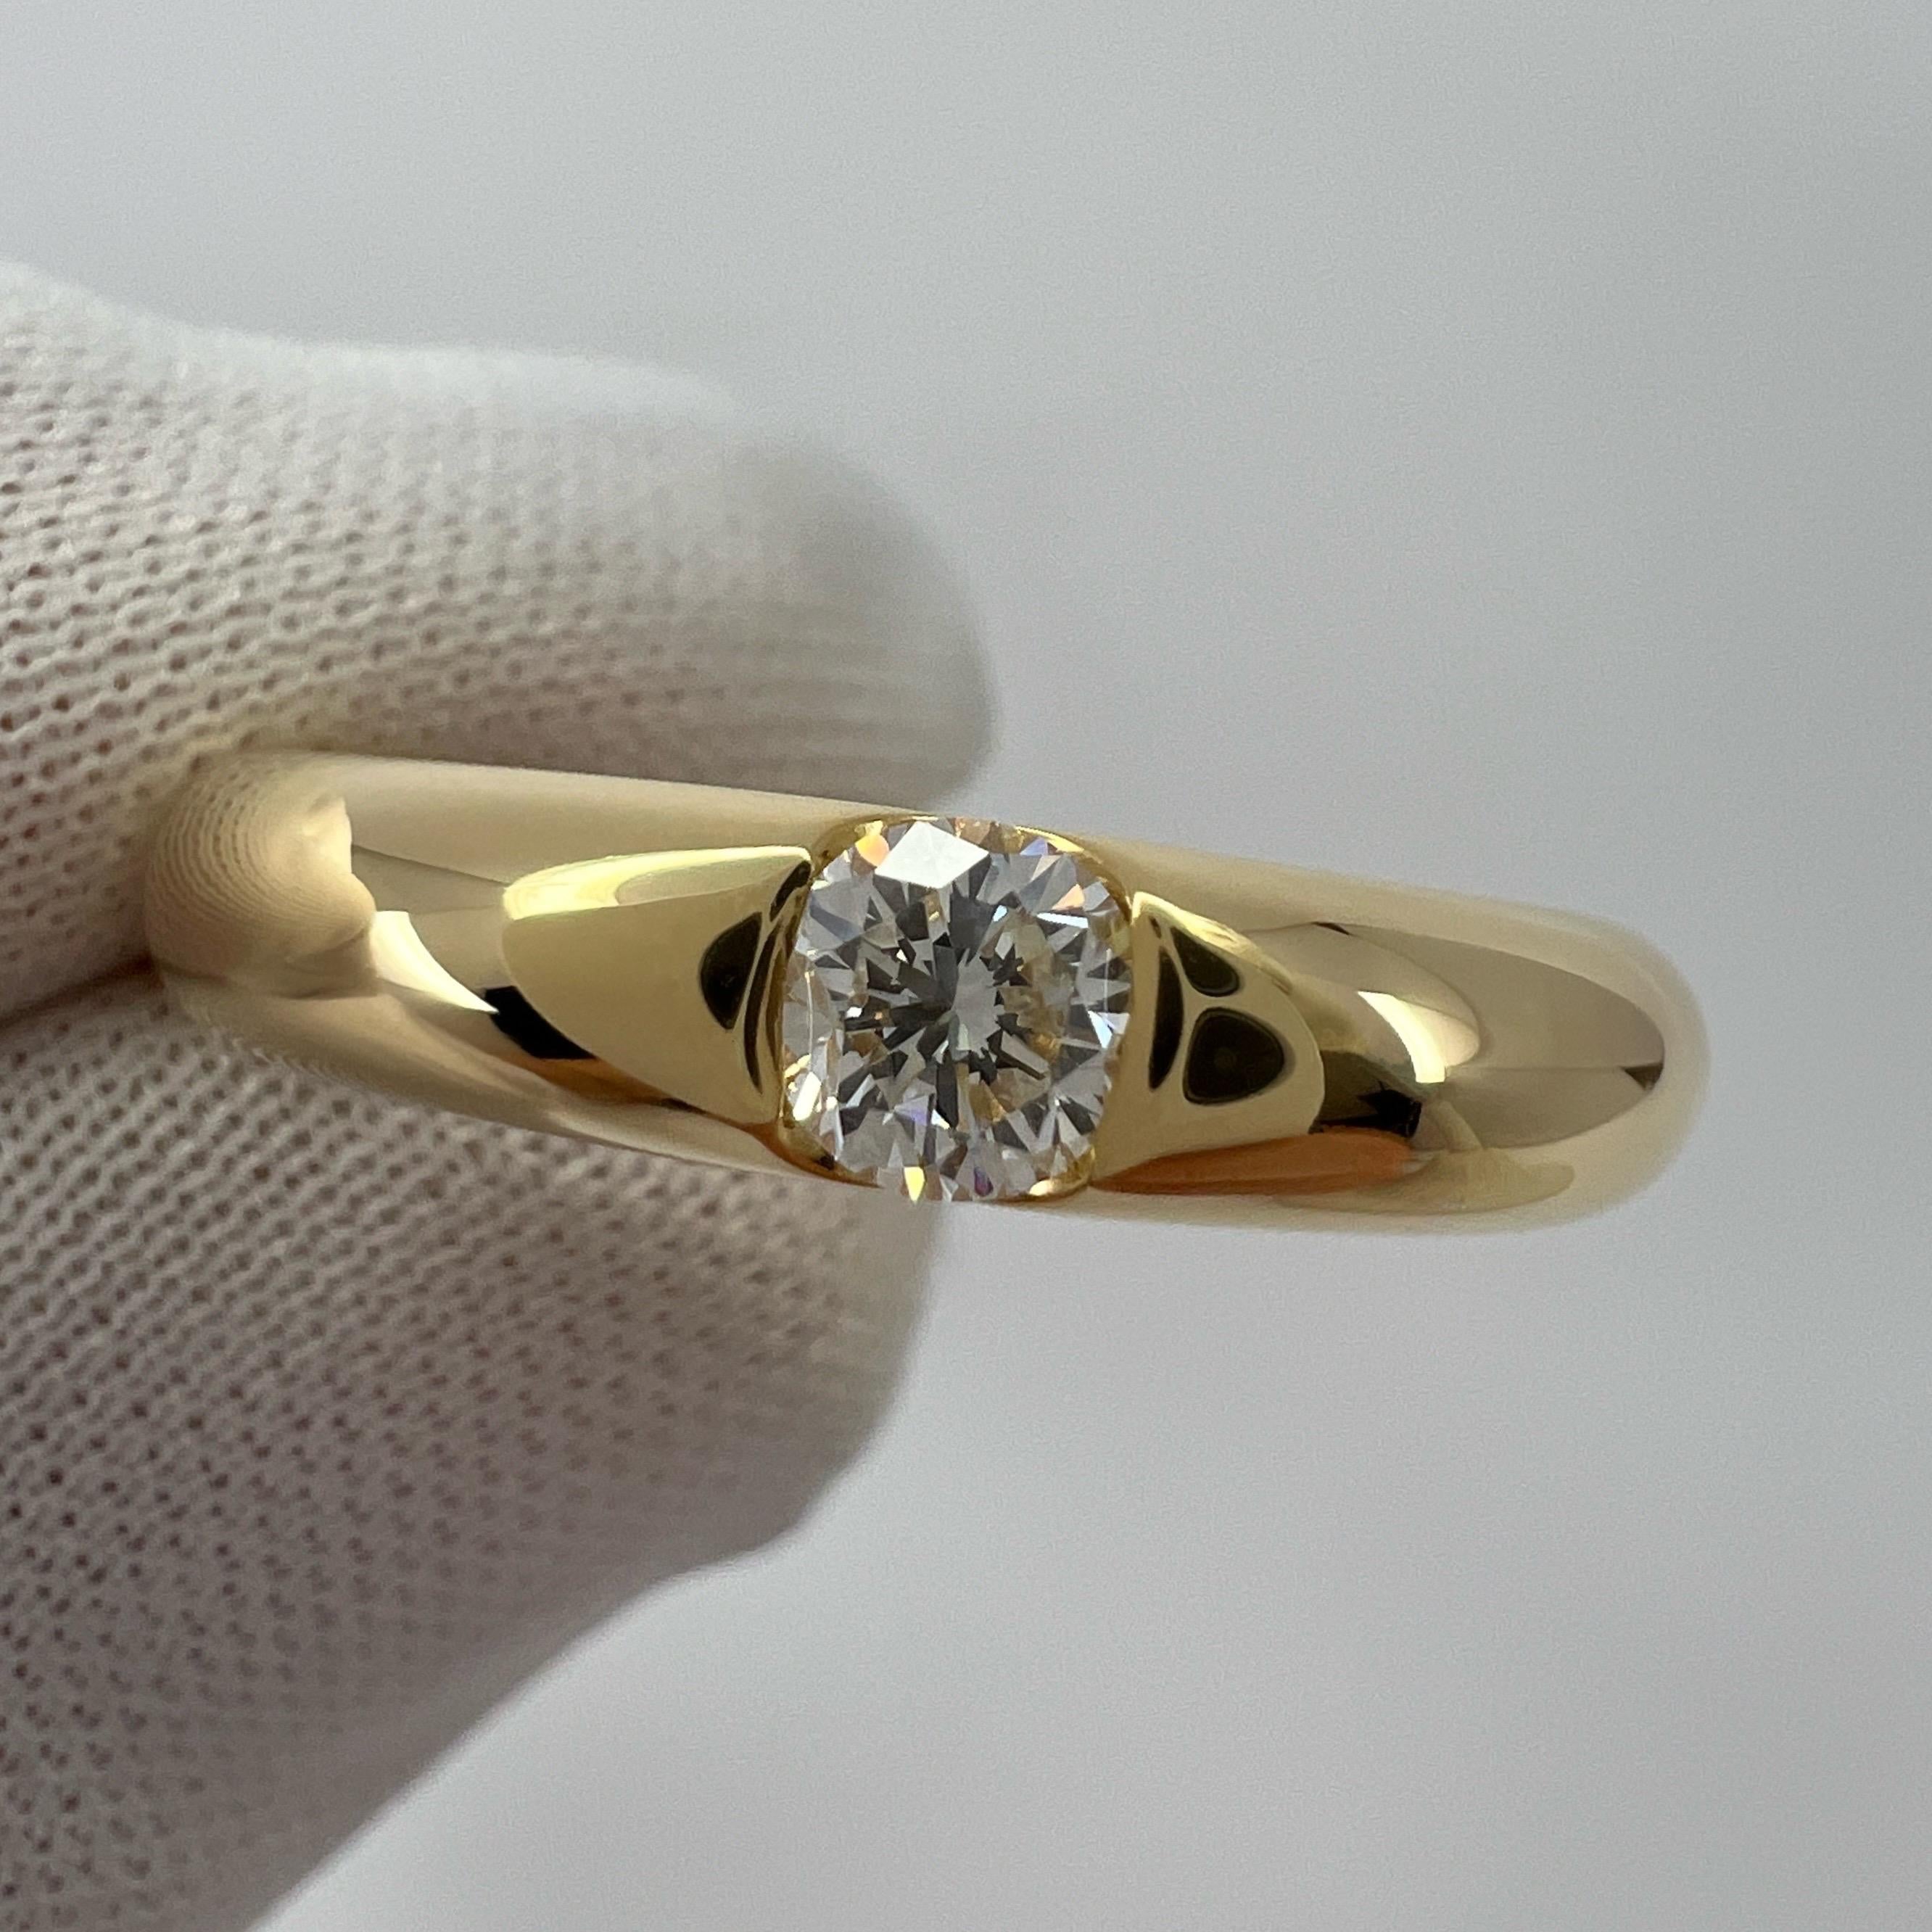 Vintage Cartier Round Diamond Ellipse 18k Yellow Gold Solitaire Band Ring US5 49 5